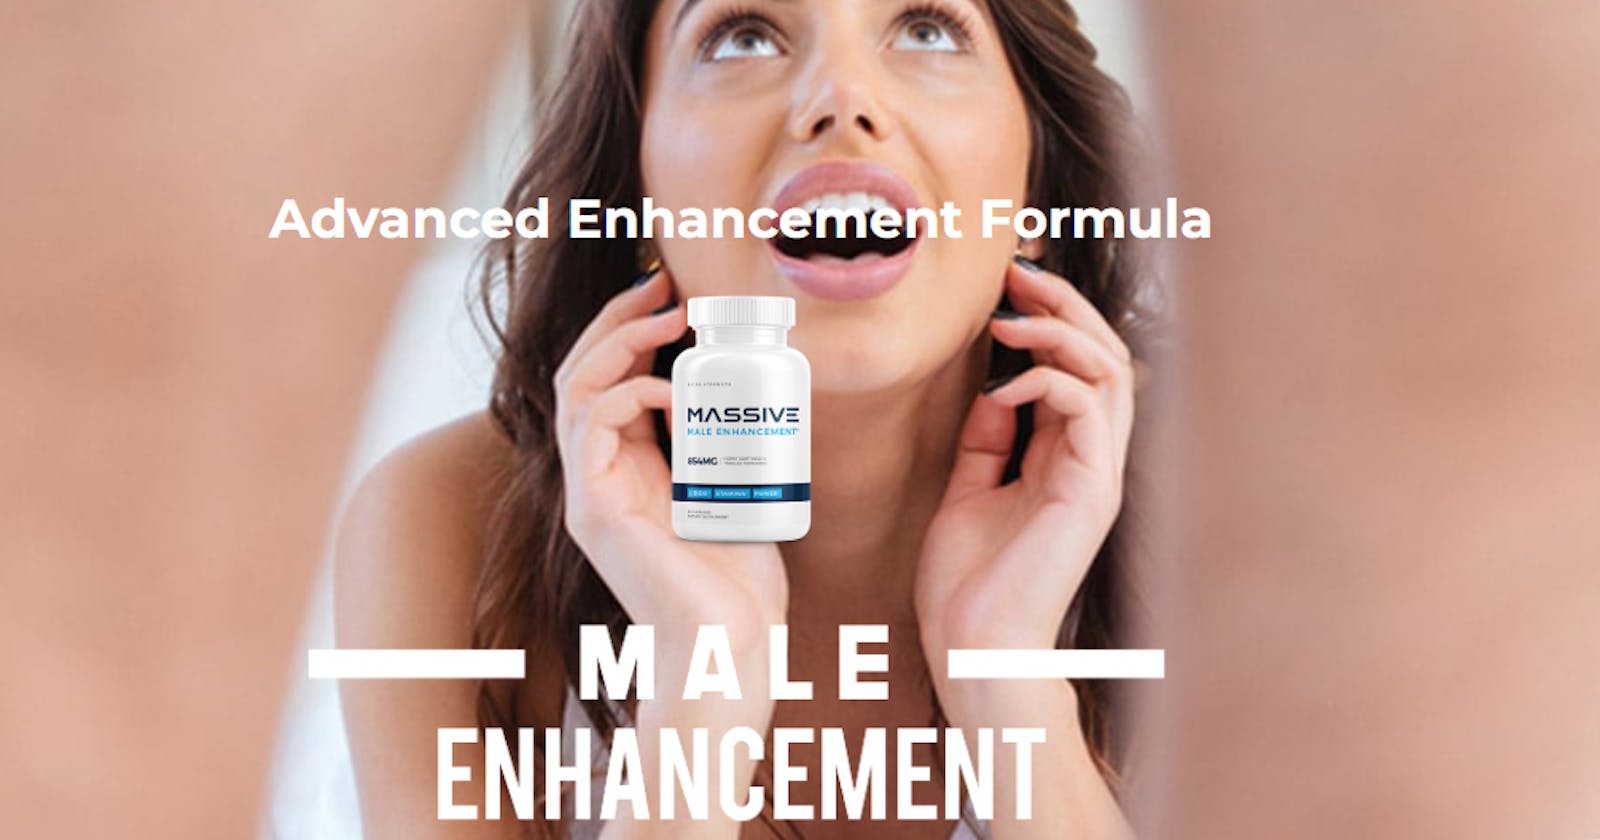 Massive Male Enhancement – Healthy Prostate Support That Works?